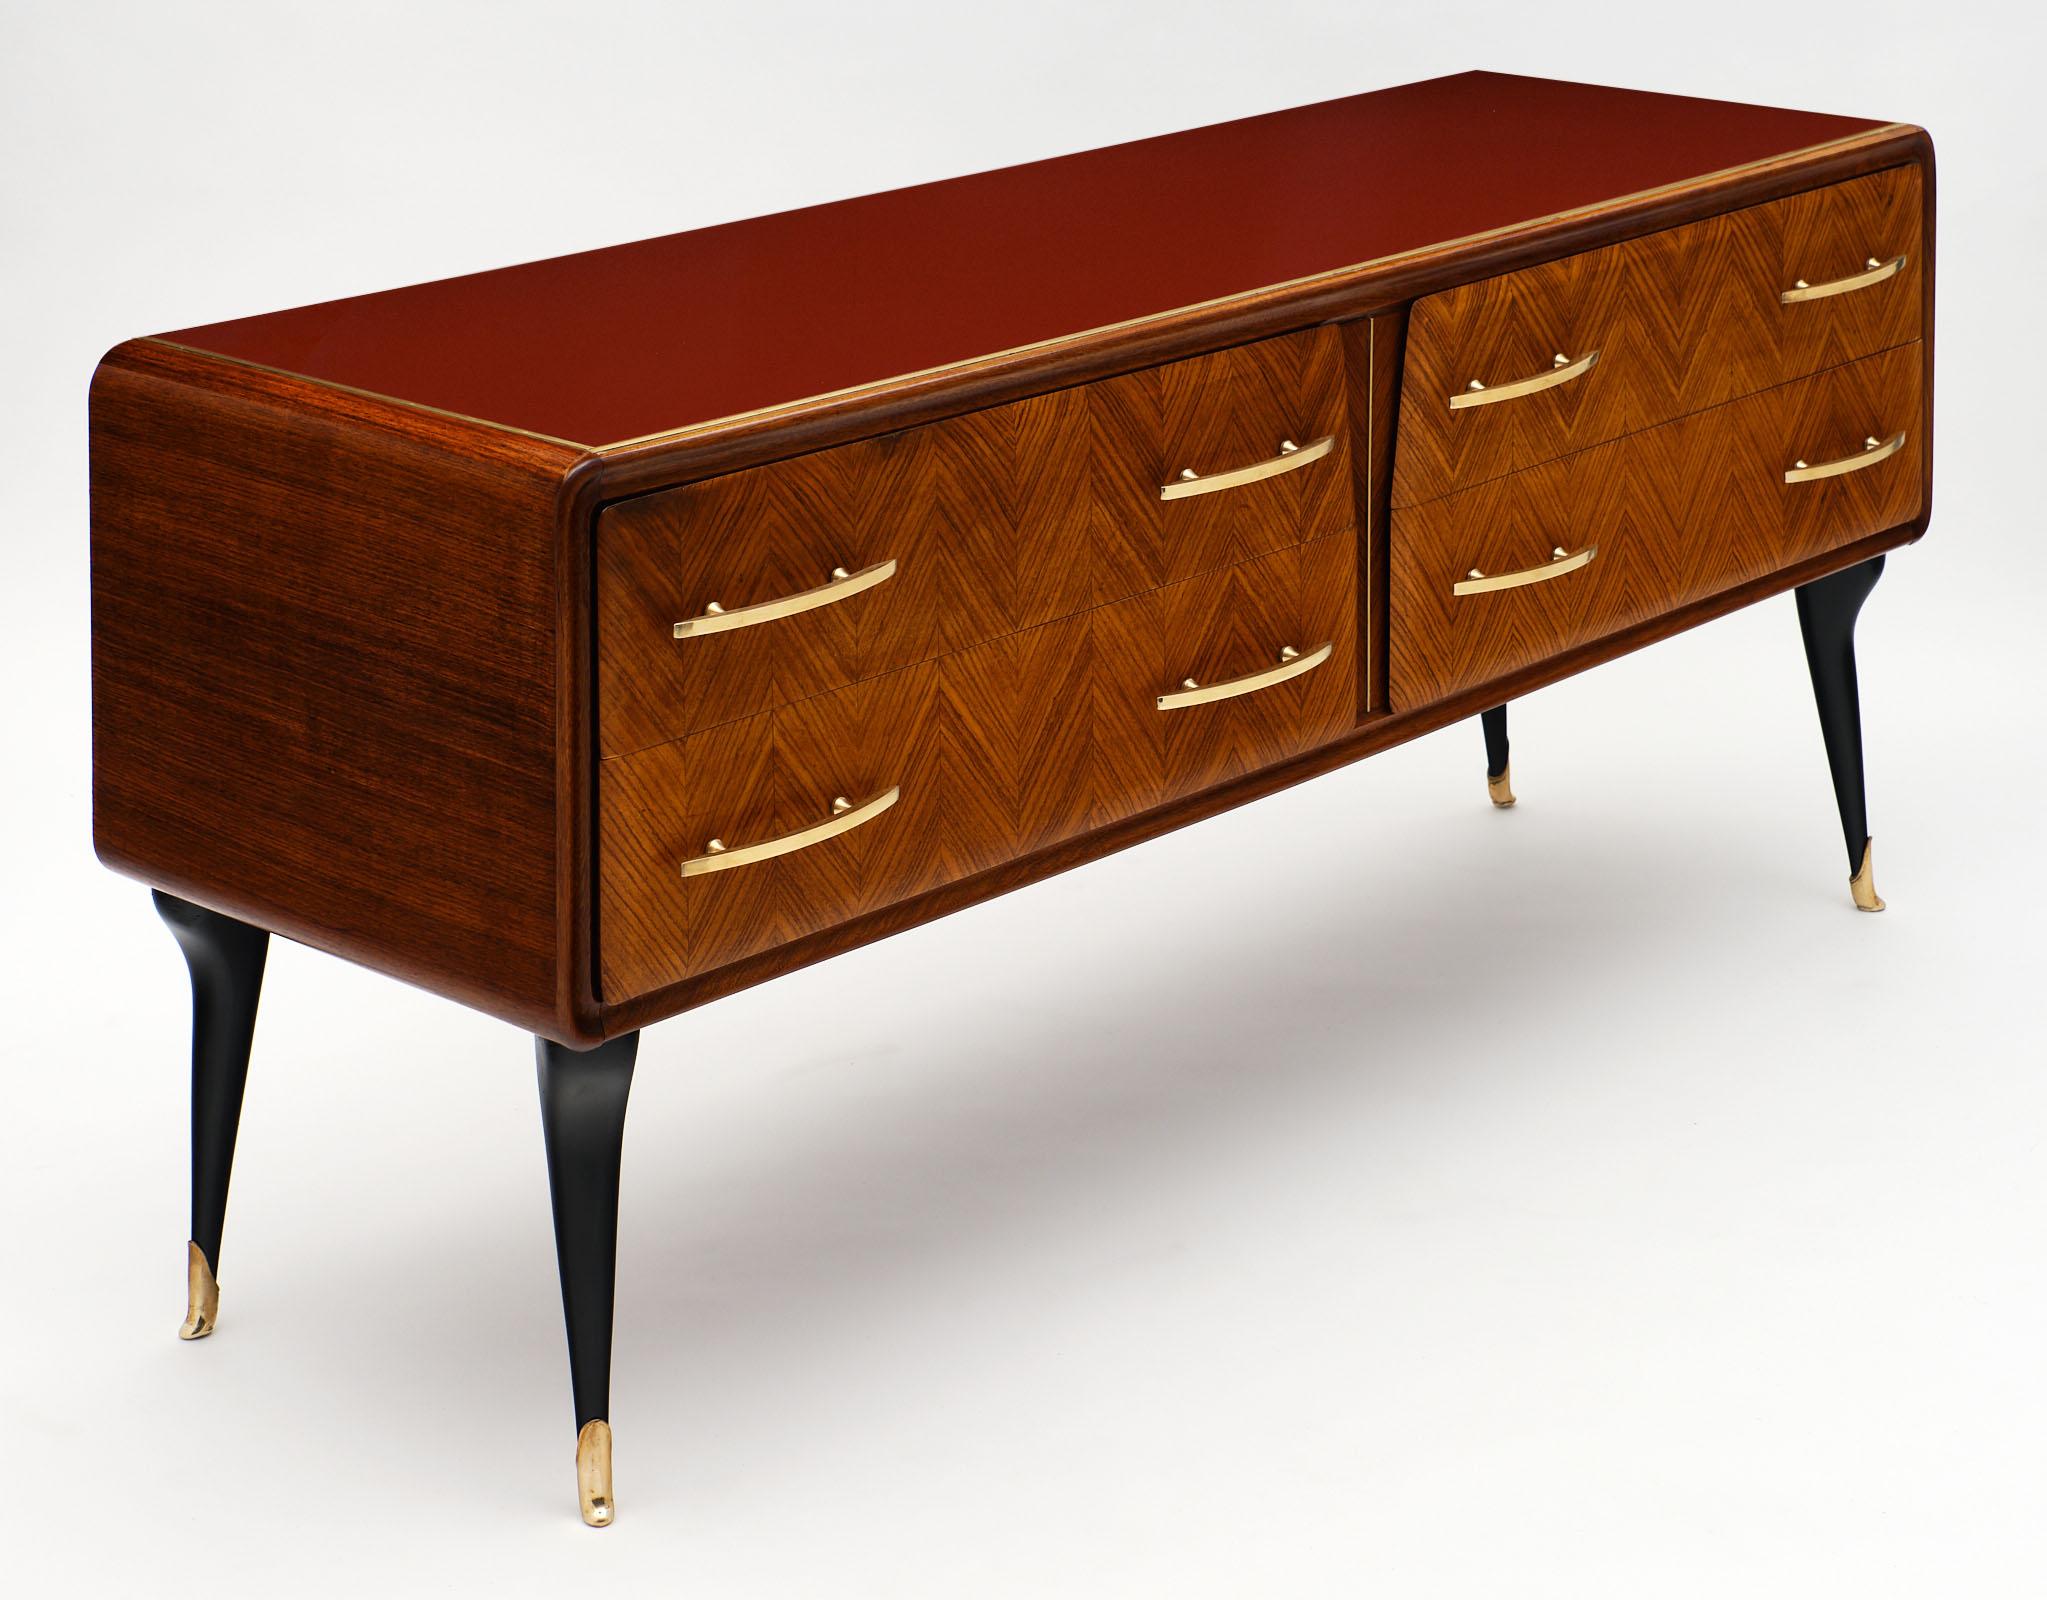 Vintage Italian midcentury chest in the manner of Paolo Buffa and made of Brazilian rosewood. This elegant double chest of drawers features four dovetailed drawers with bronze handles and “chevron” veneer on facade. The cabinet is covered with the